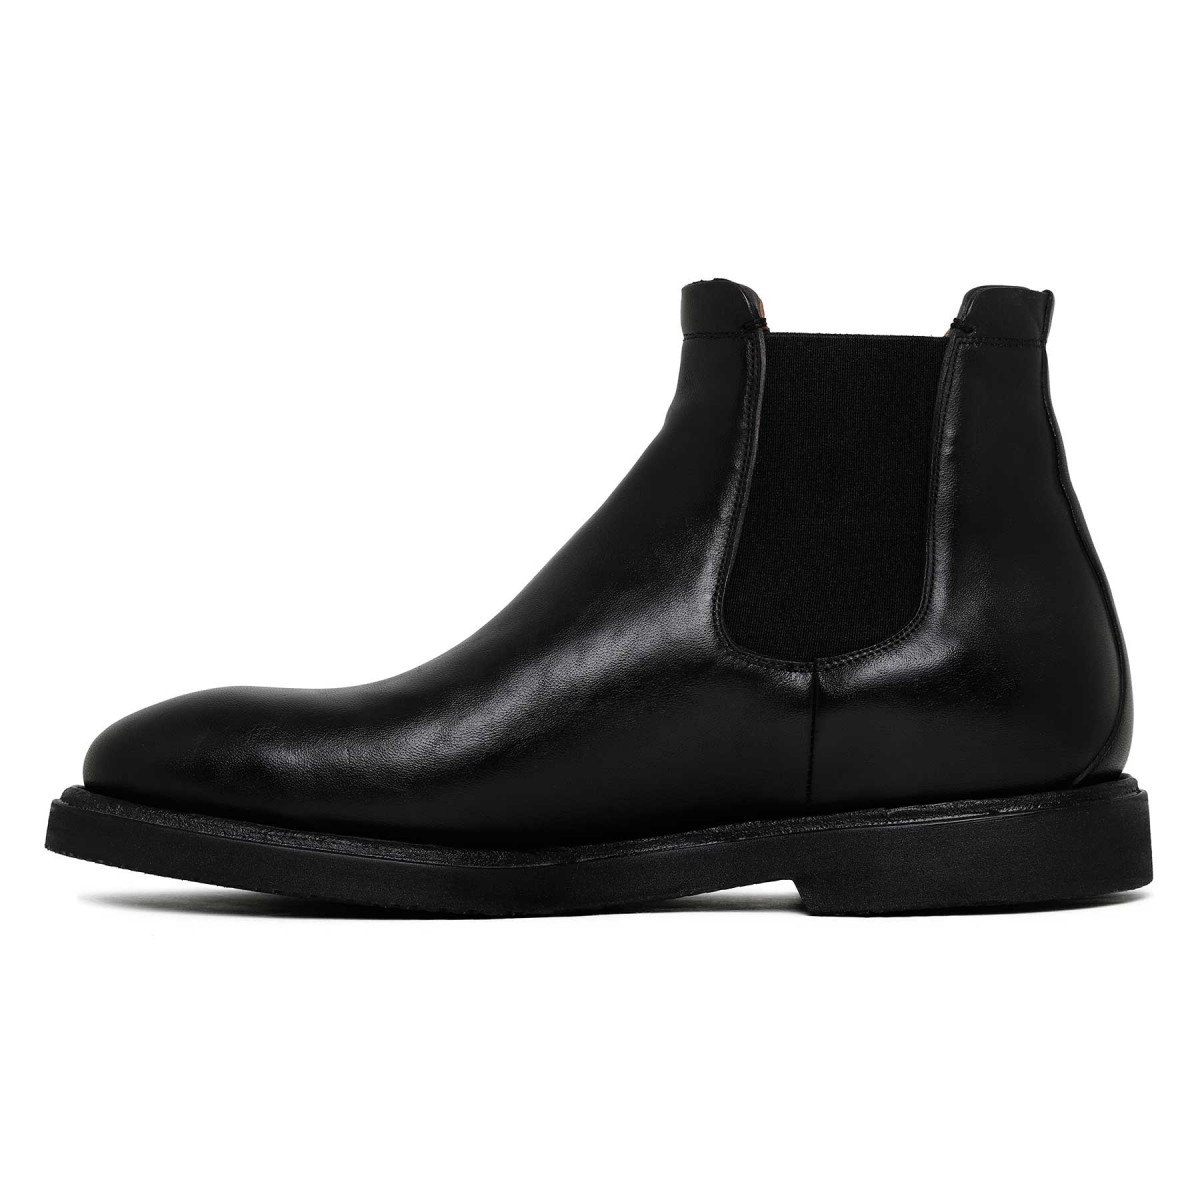 Black leather Beatles ankle boots